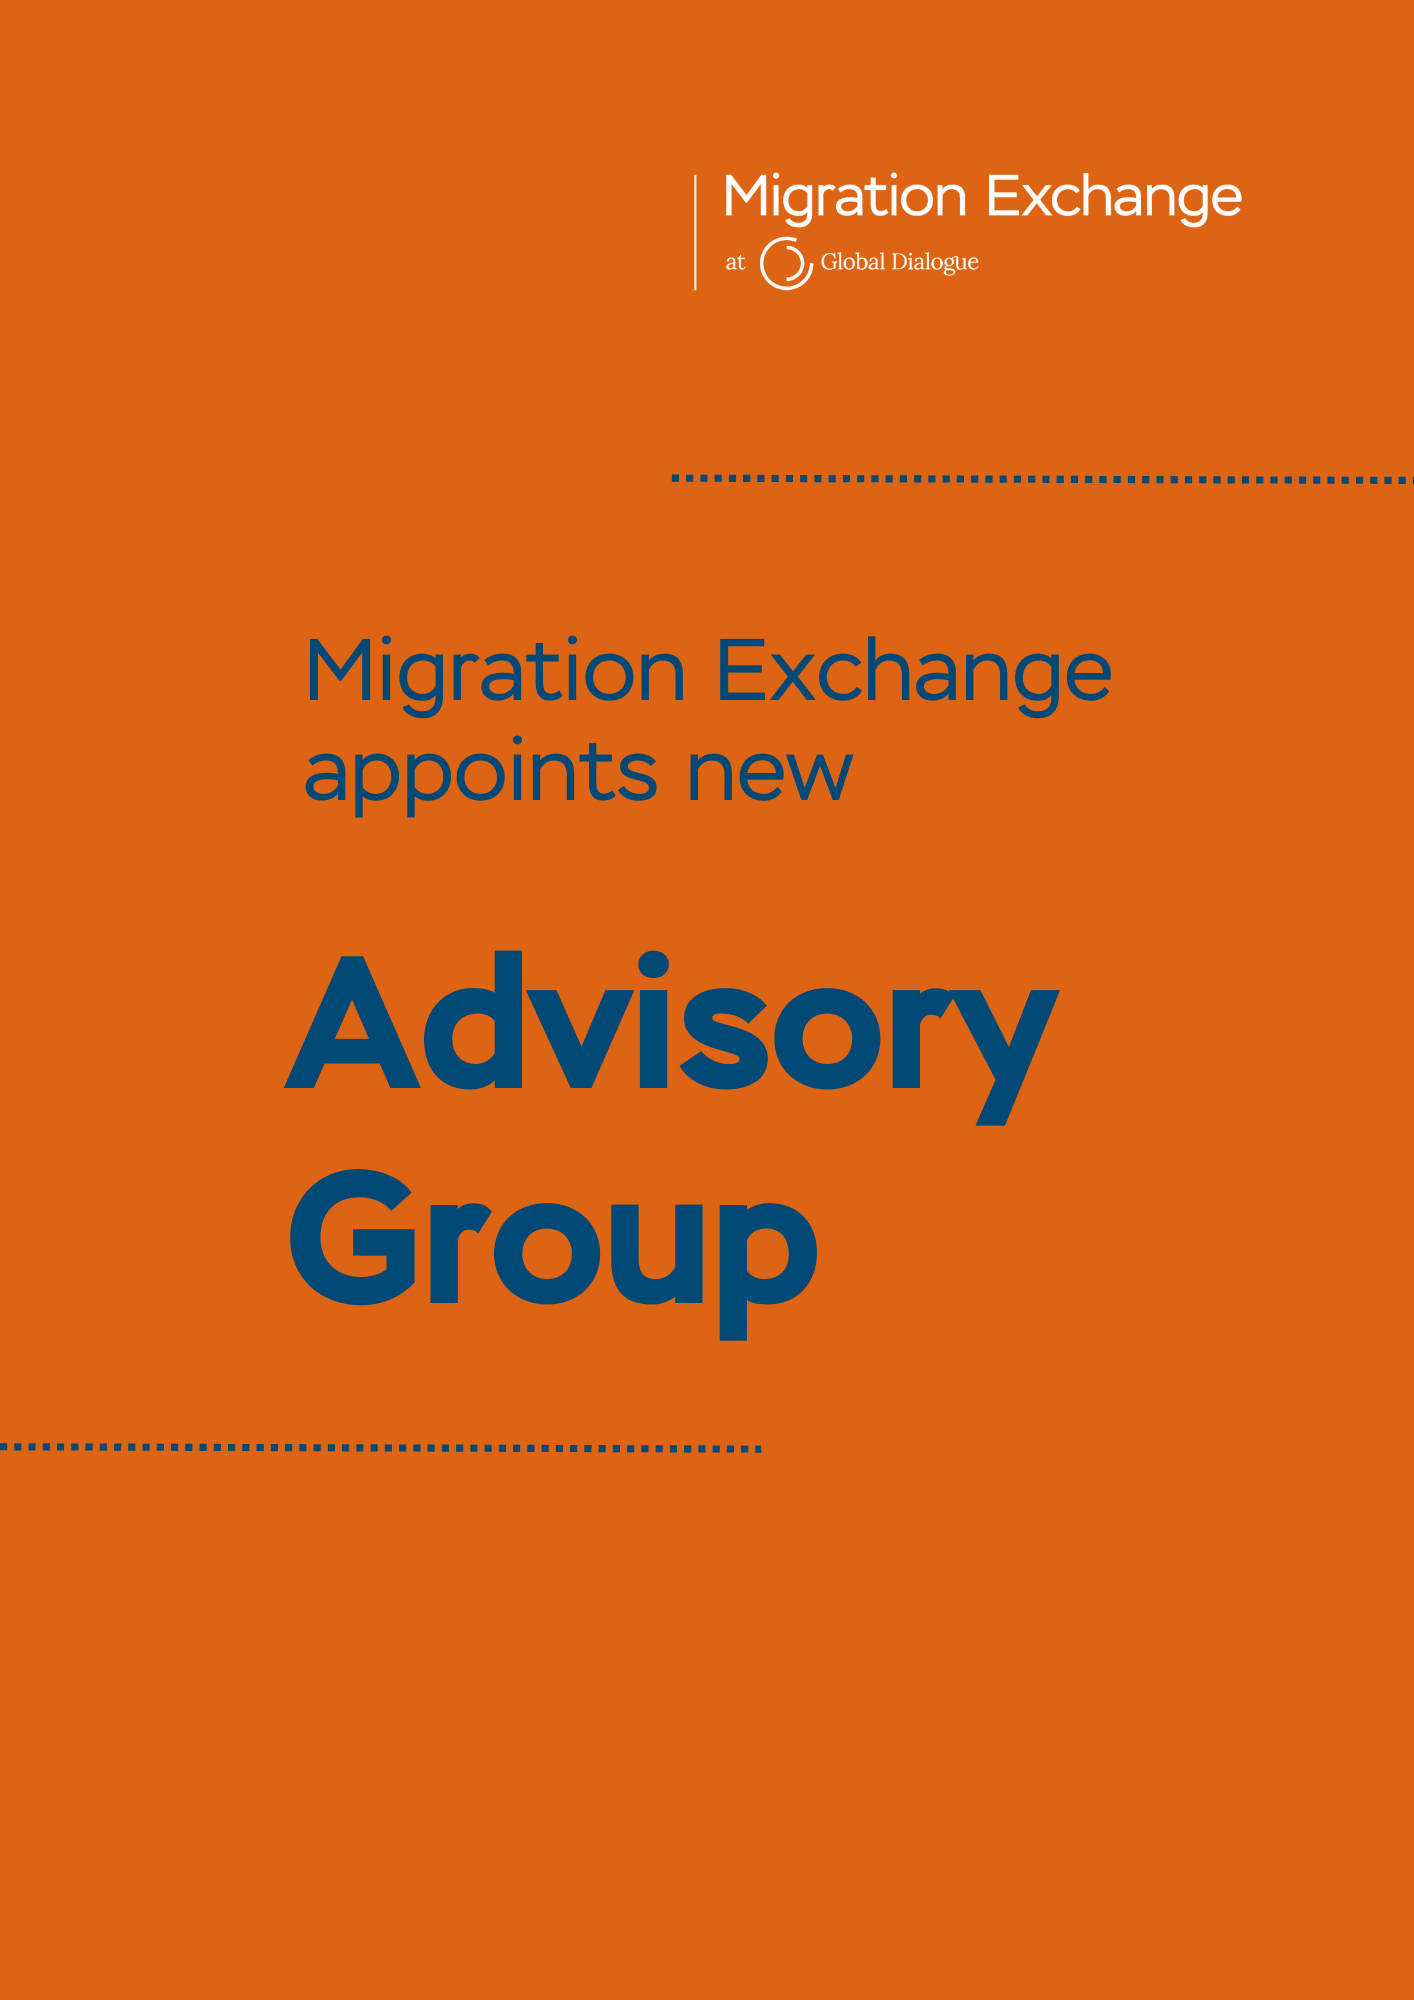 NEWS: Introducing Migration Exchange’s new advisory group